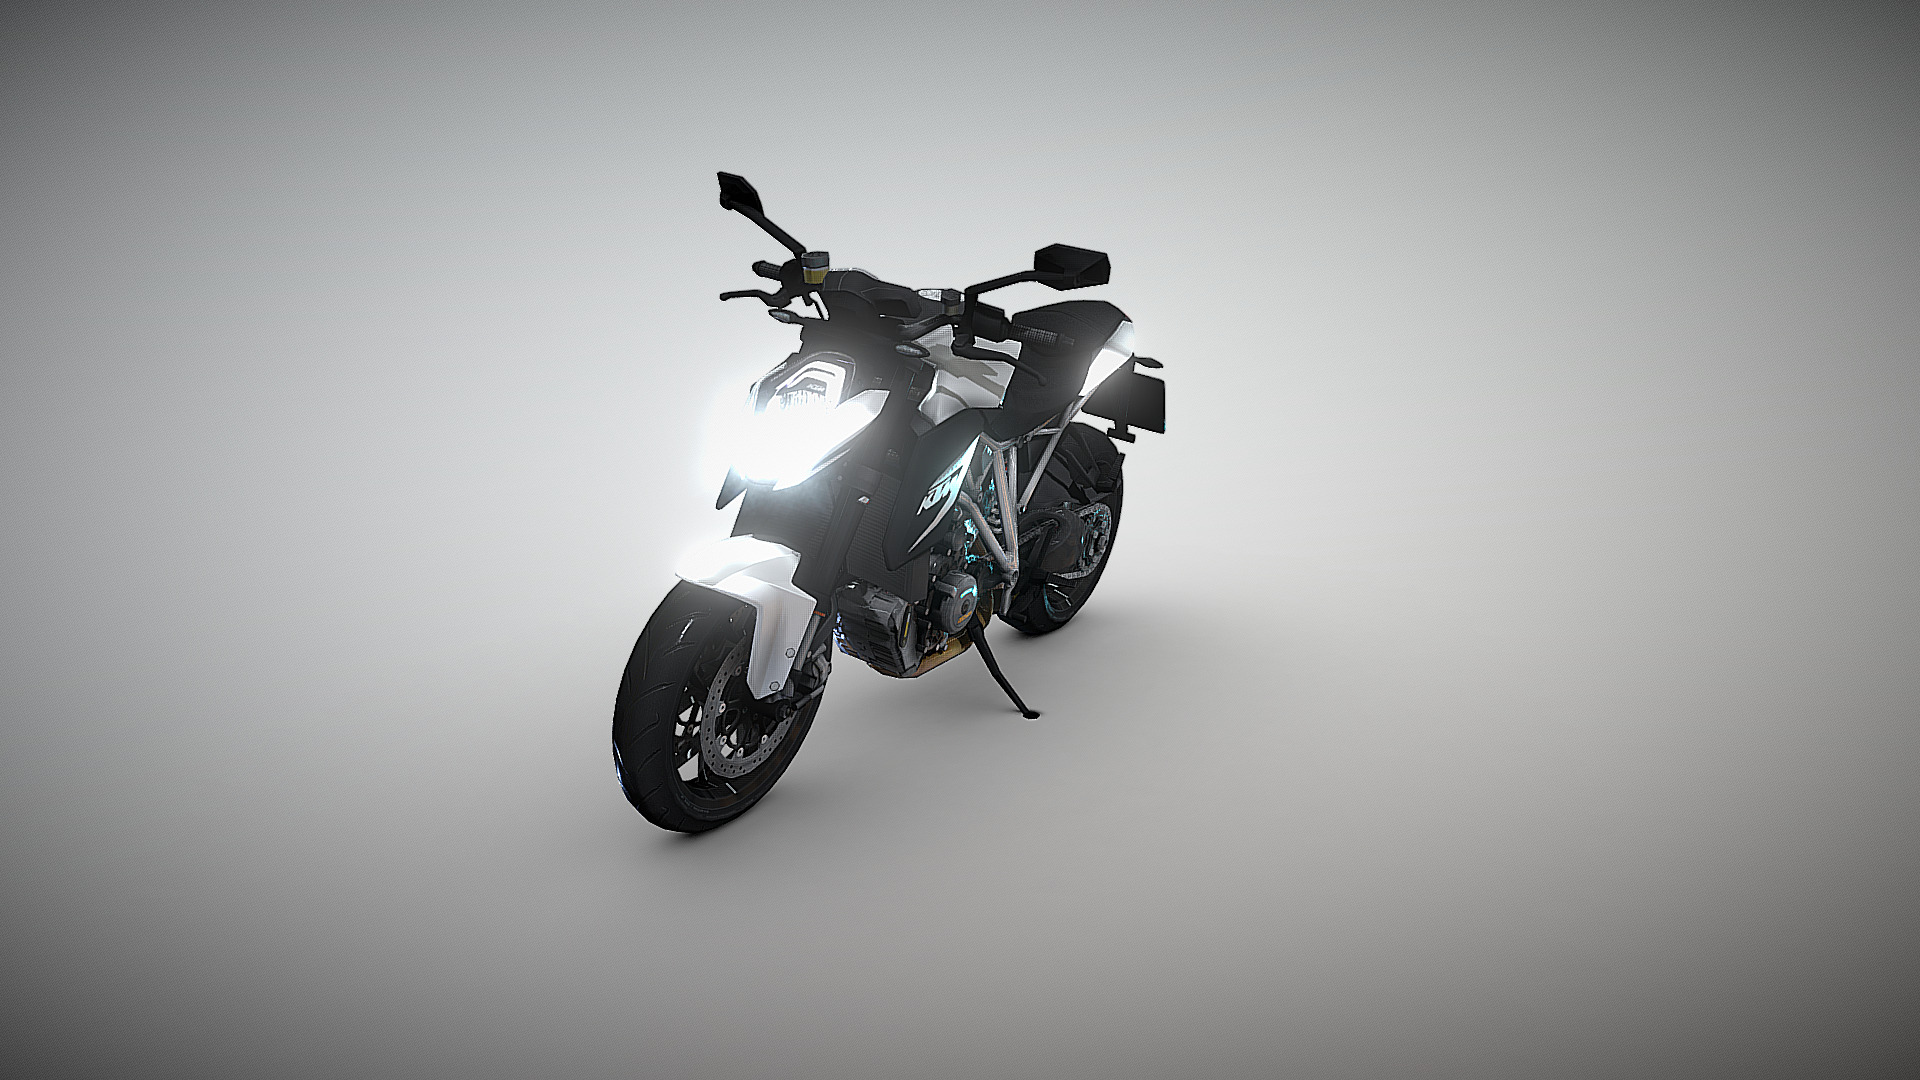 will be further cleaning the mesh up &amp; re-releasing to be a paid content that includes a unitypackage as well

Dont Ask for free downloads, it will never happen! - KTM Super Duke R - 3D model by OGL (@GaryLim) 3d model